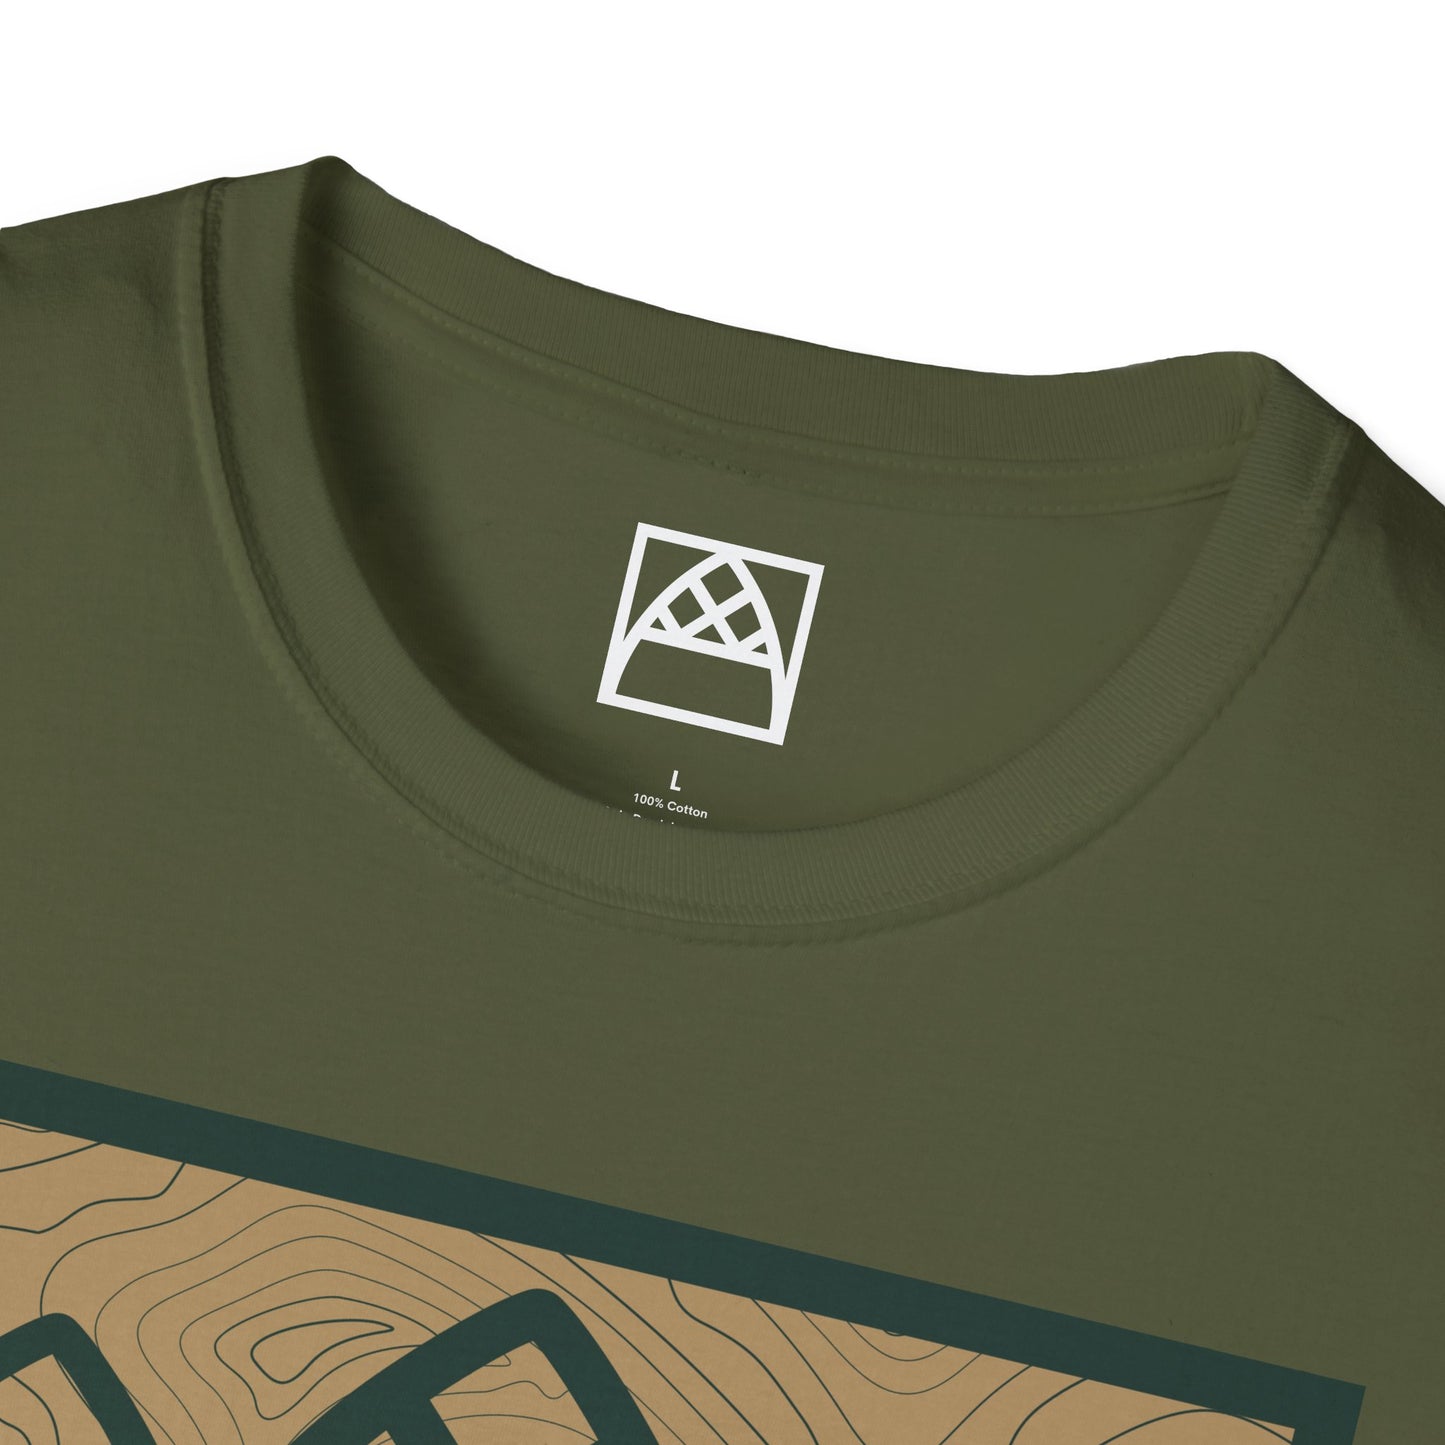 Official Arched Cabins LLC Mountain T-Shirt